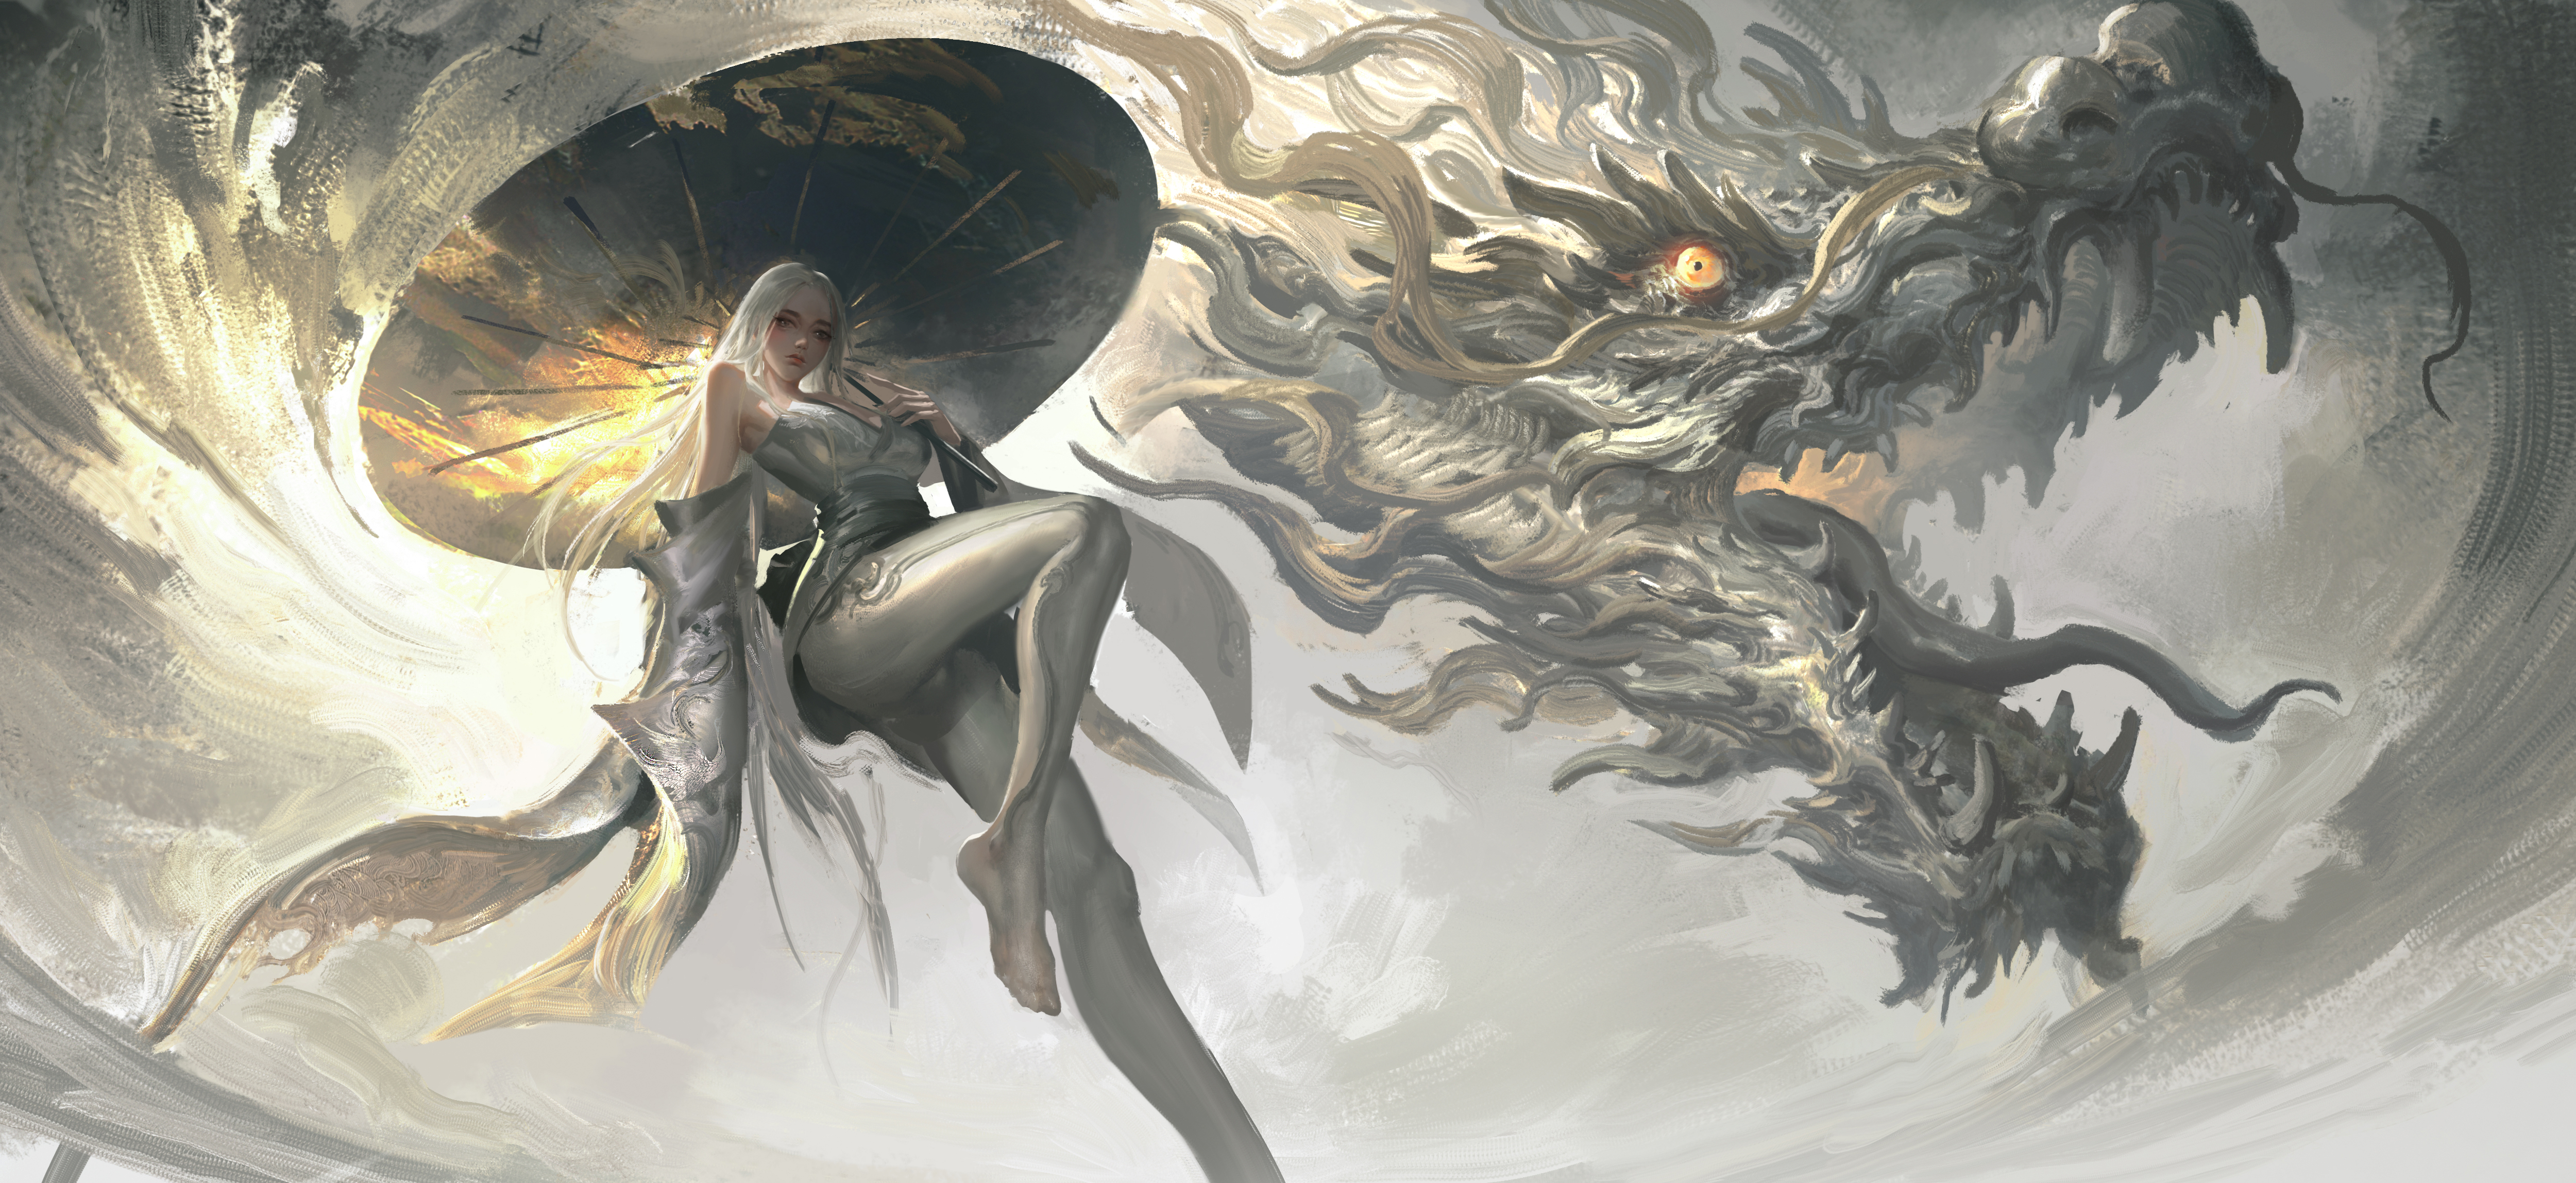 LEO Artist Low Angle Umbrella Looking At Viewer Dragon Closed Mouth White Hair Long Sleeves Sky Deta 5000x2297